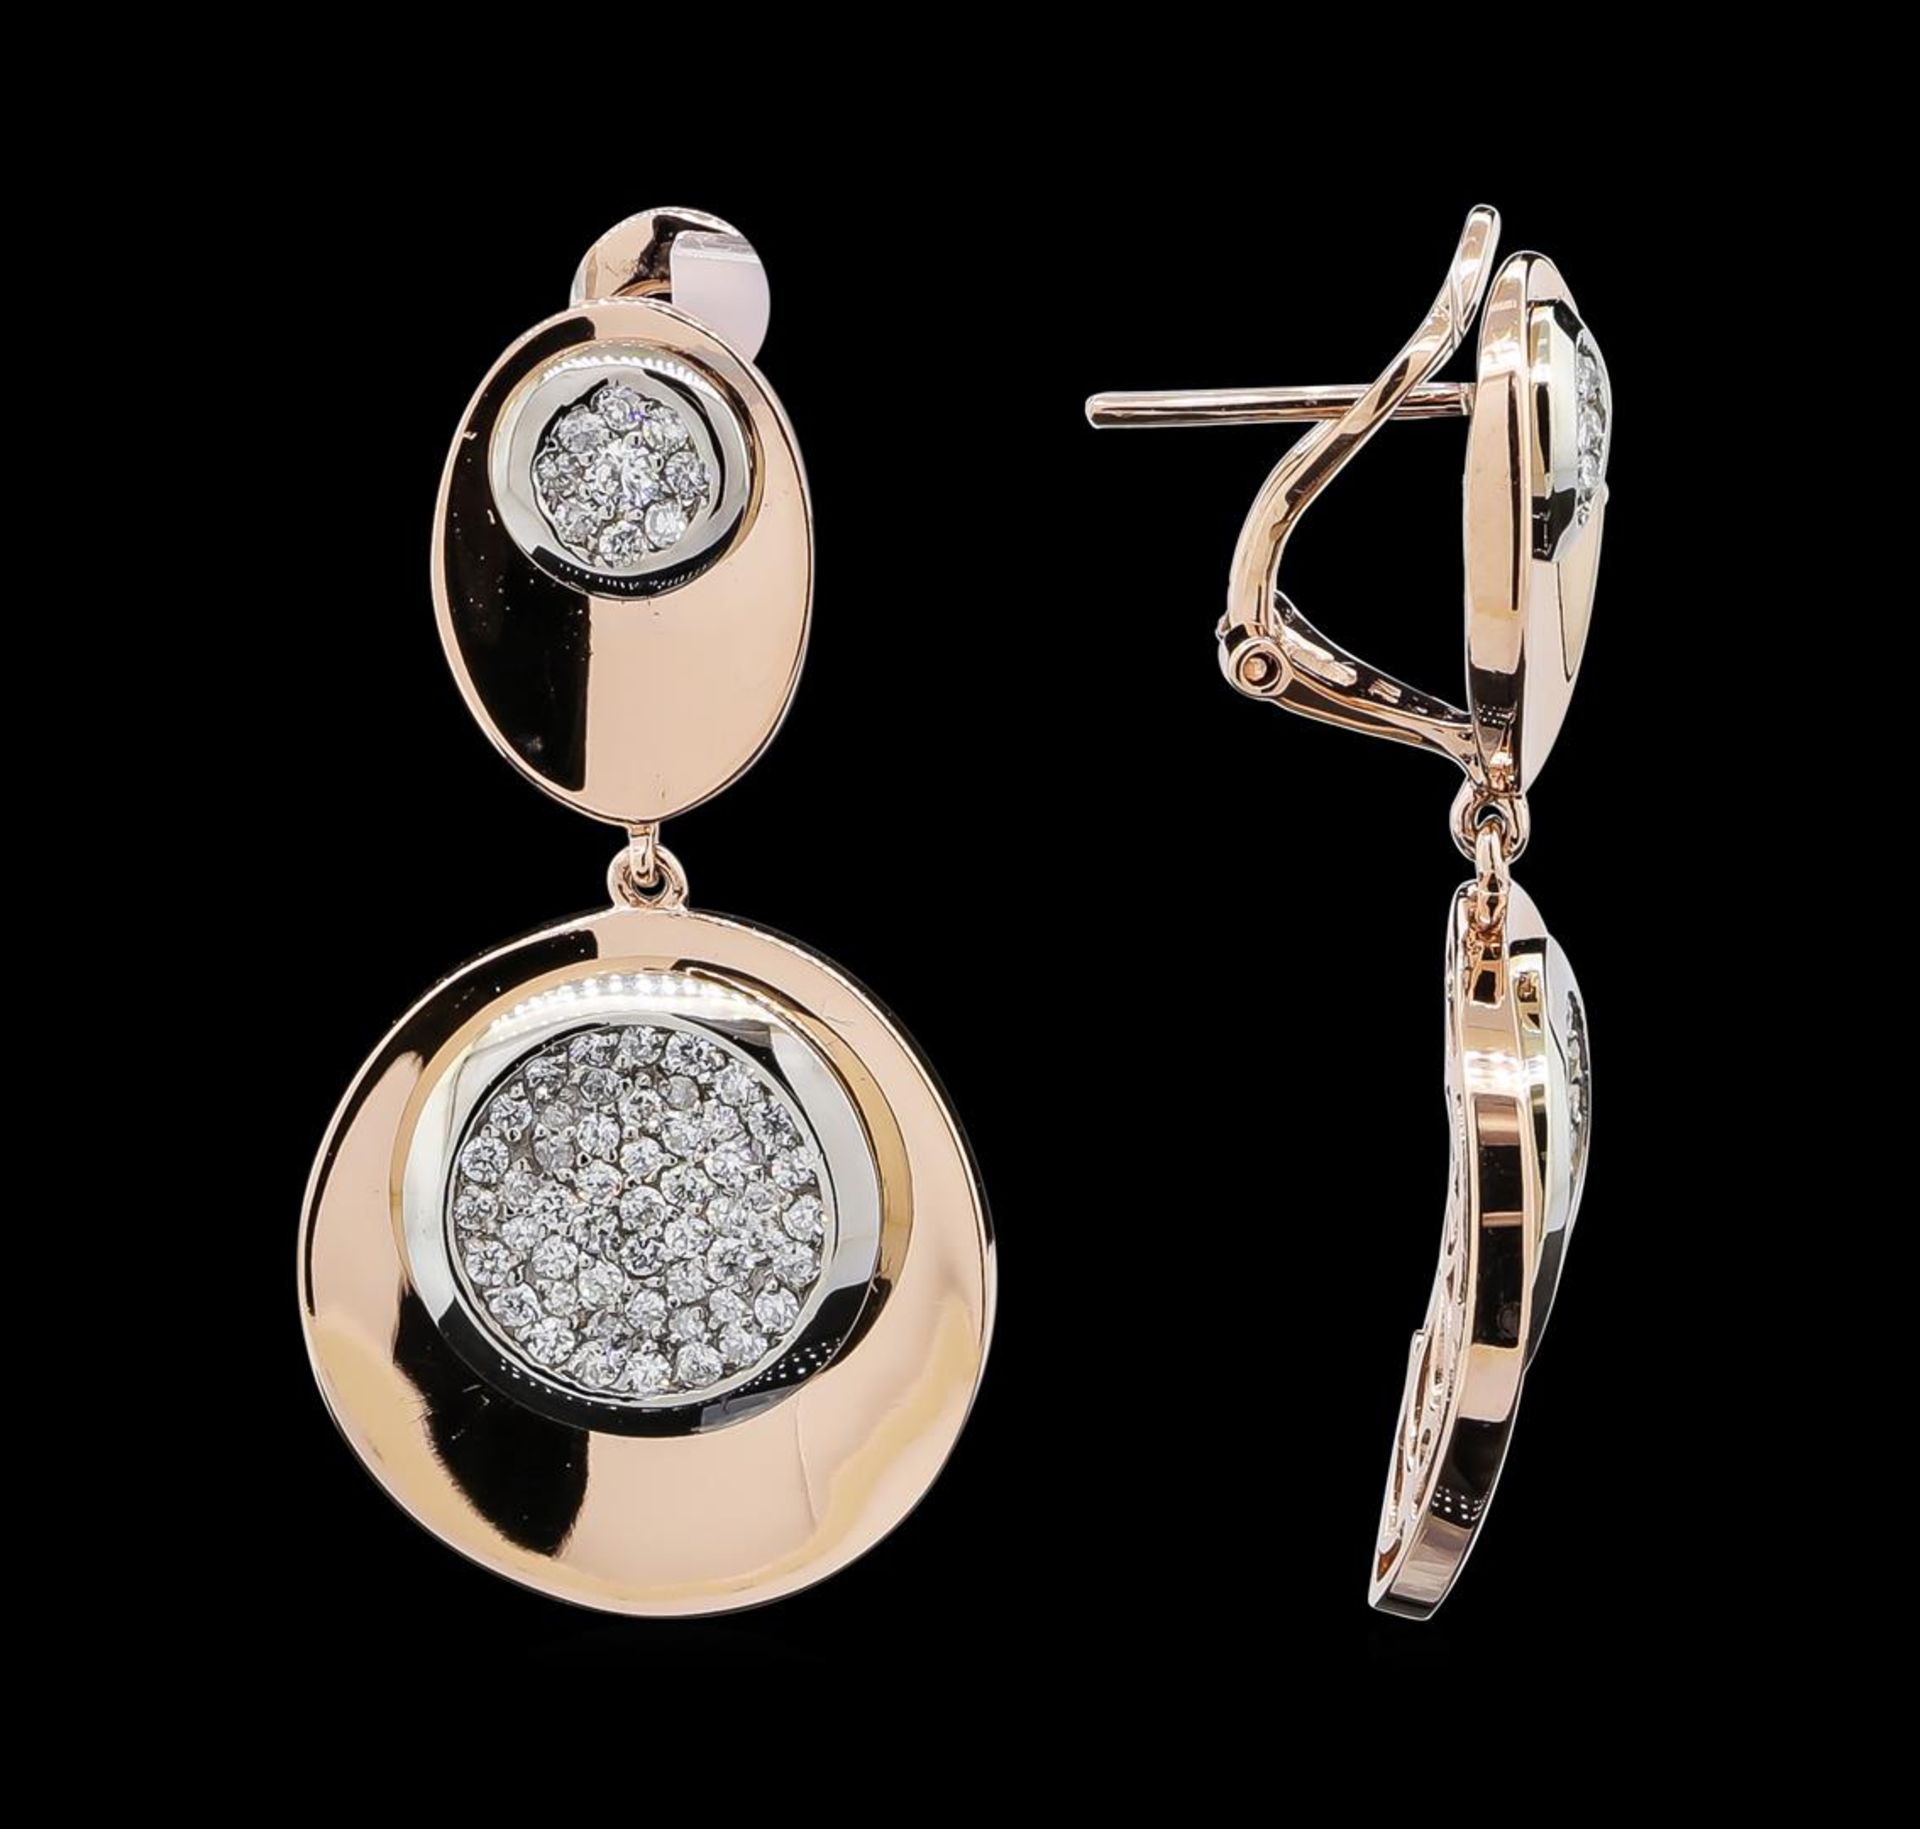 1.14 ctw Diamond Earrings - 14KT Rose and White Gold - Image 2 of 3